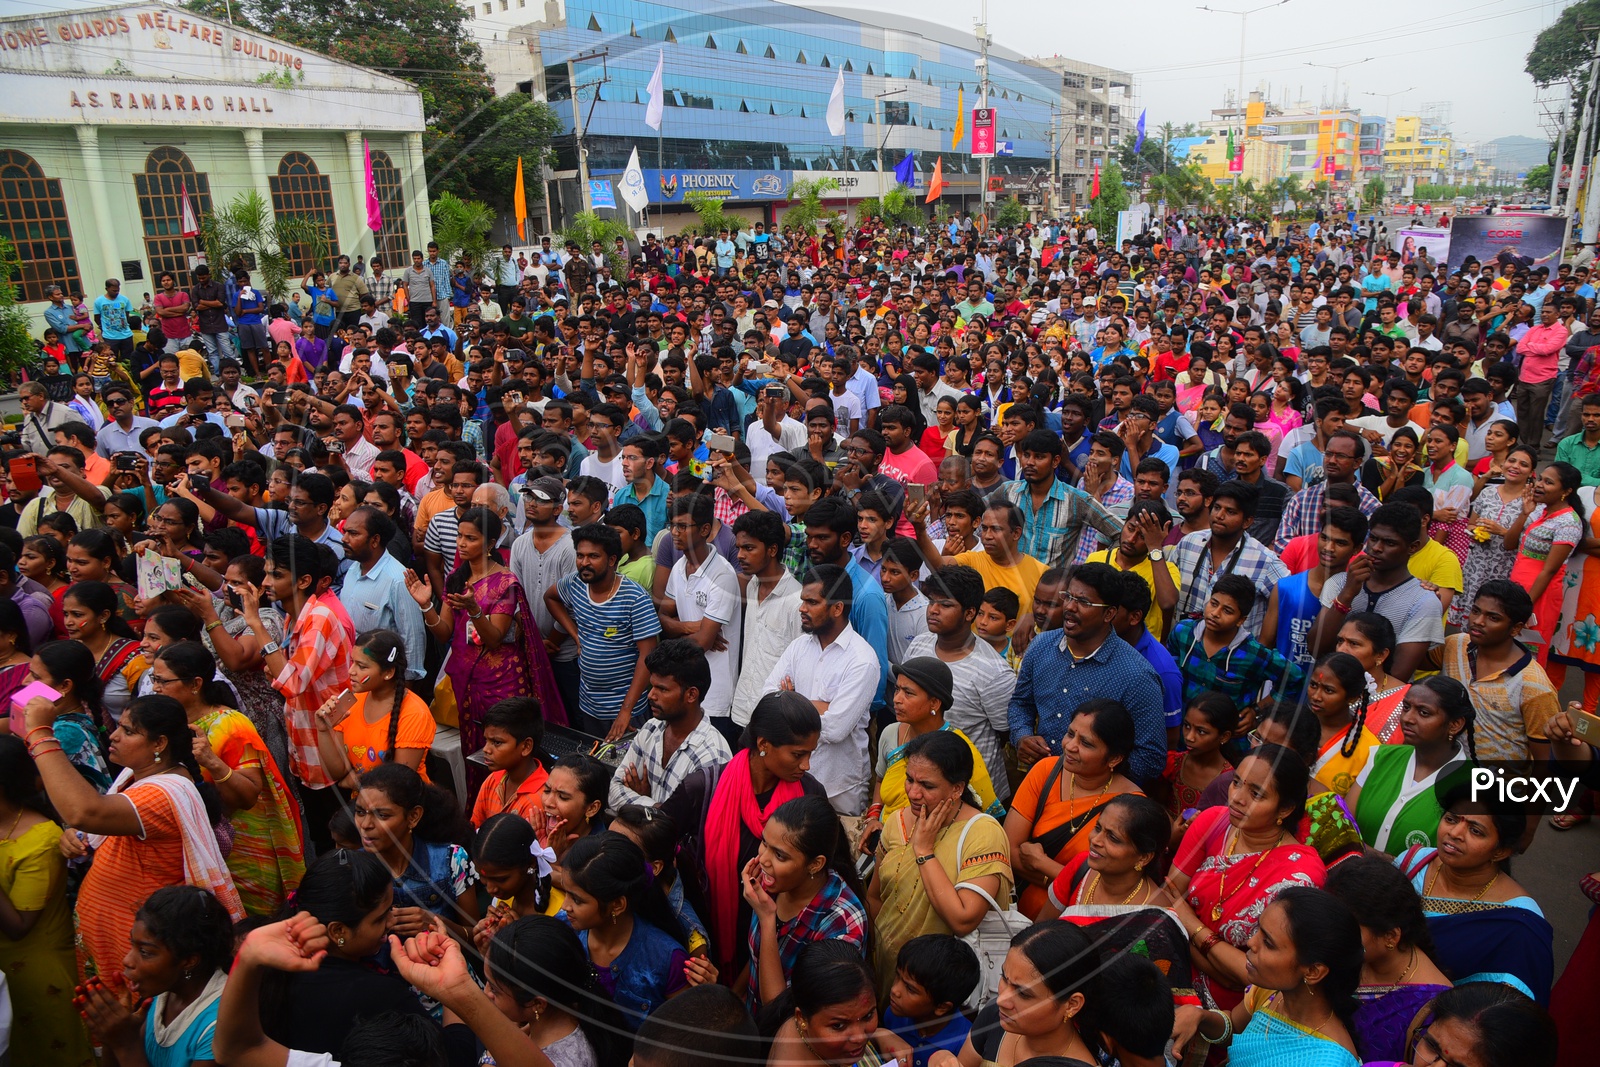 Crowd Watching Stage In an Event